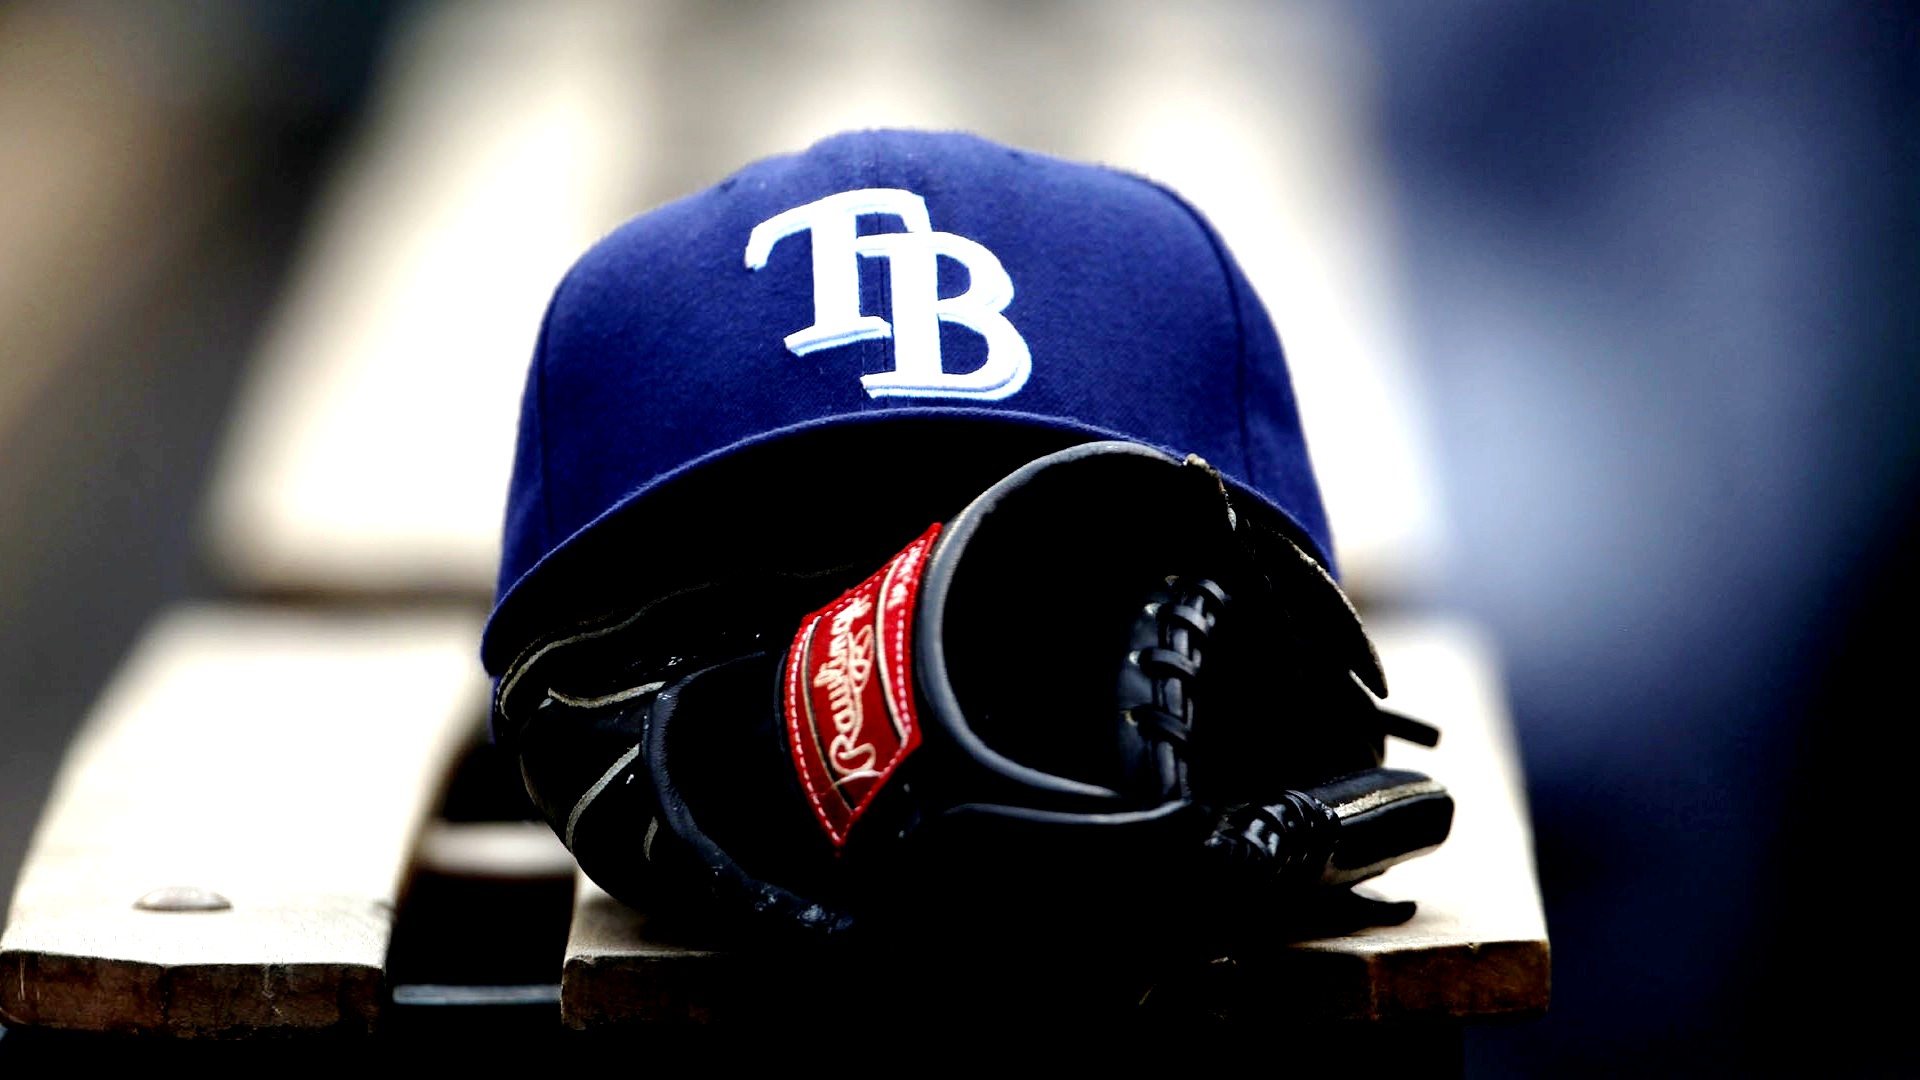 HD Tampa Bay Rays Backgrounds with high-resolution 1920x1080 pixel. You can use this wallpaper for Mac Desktop Wallpaper, Laptop Screensavers, Android Wallpapers, Tablet or iPhone Home Screen and another mobile phone device